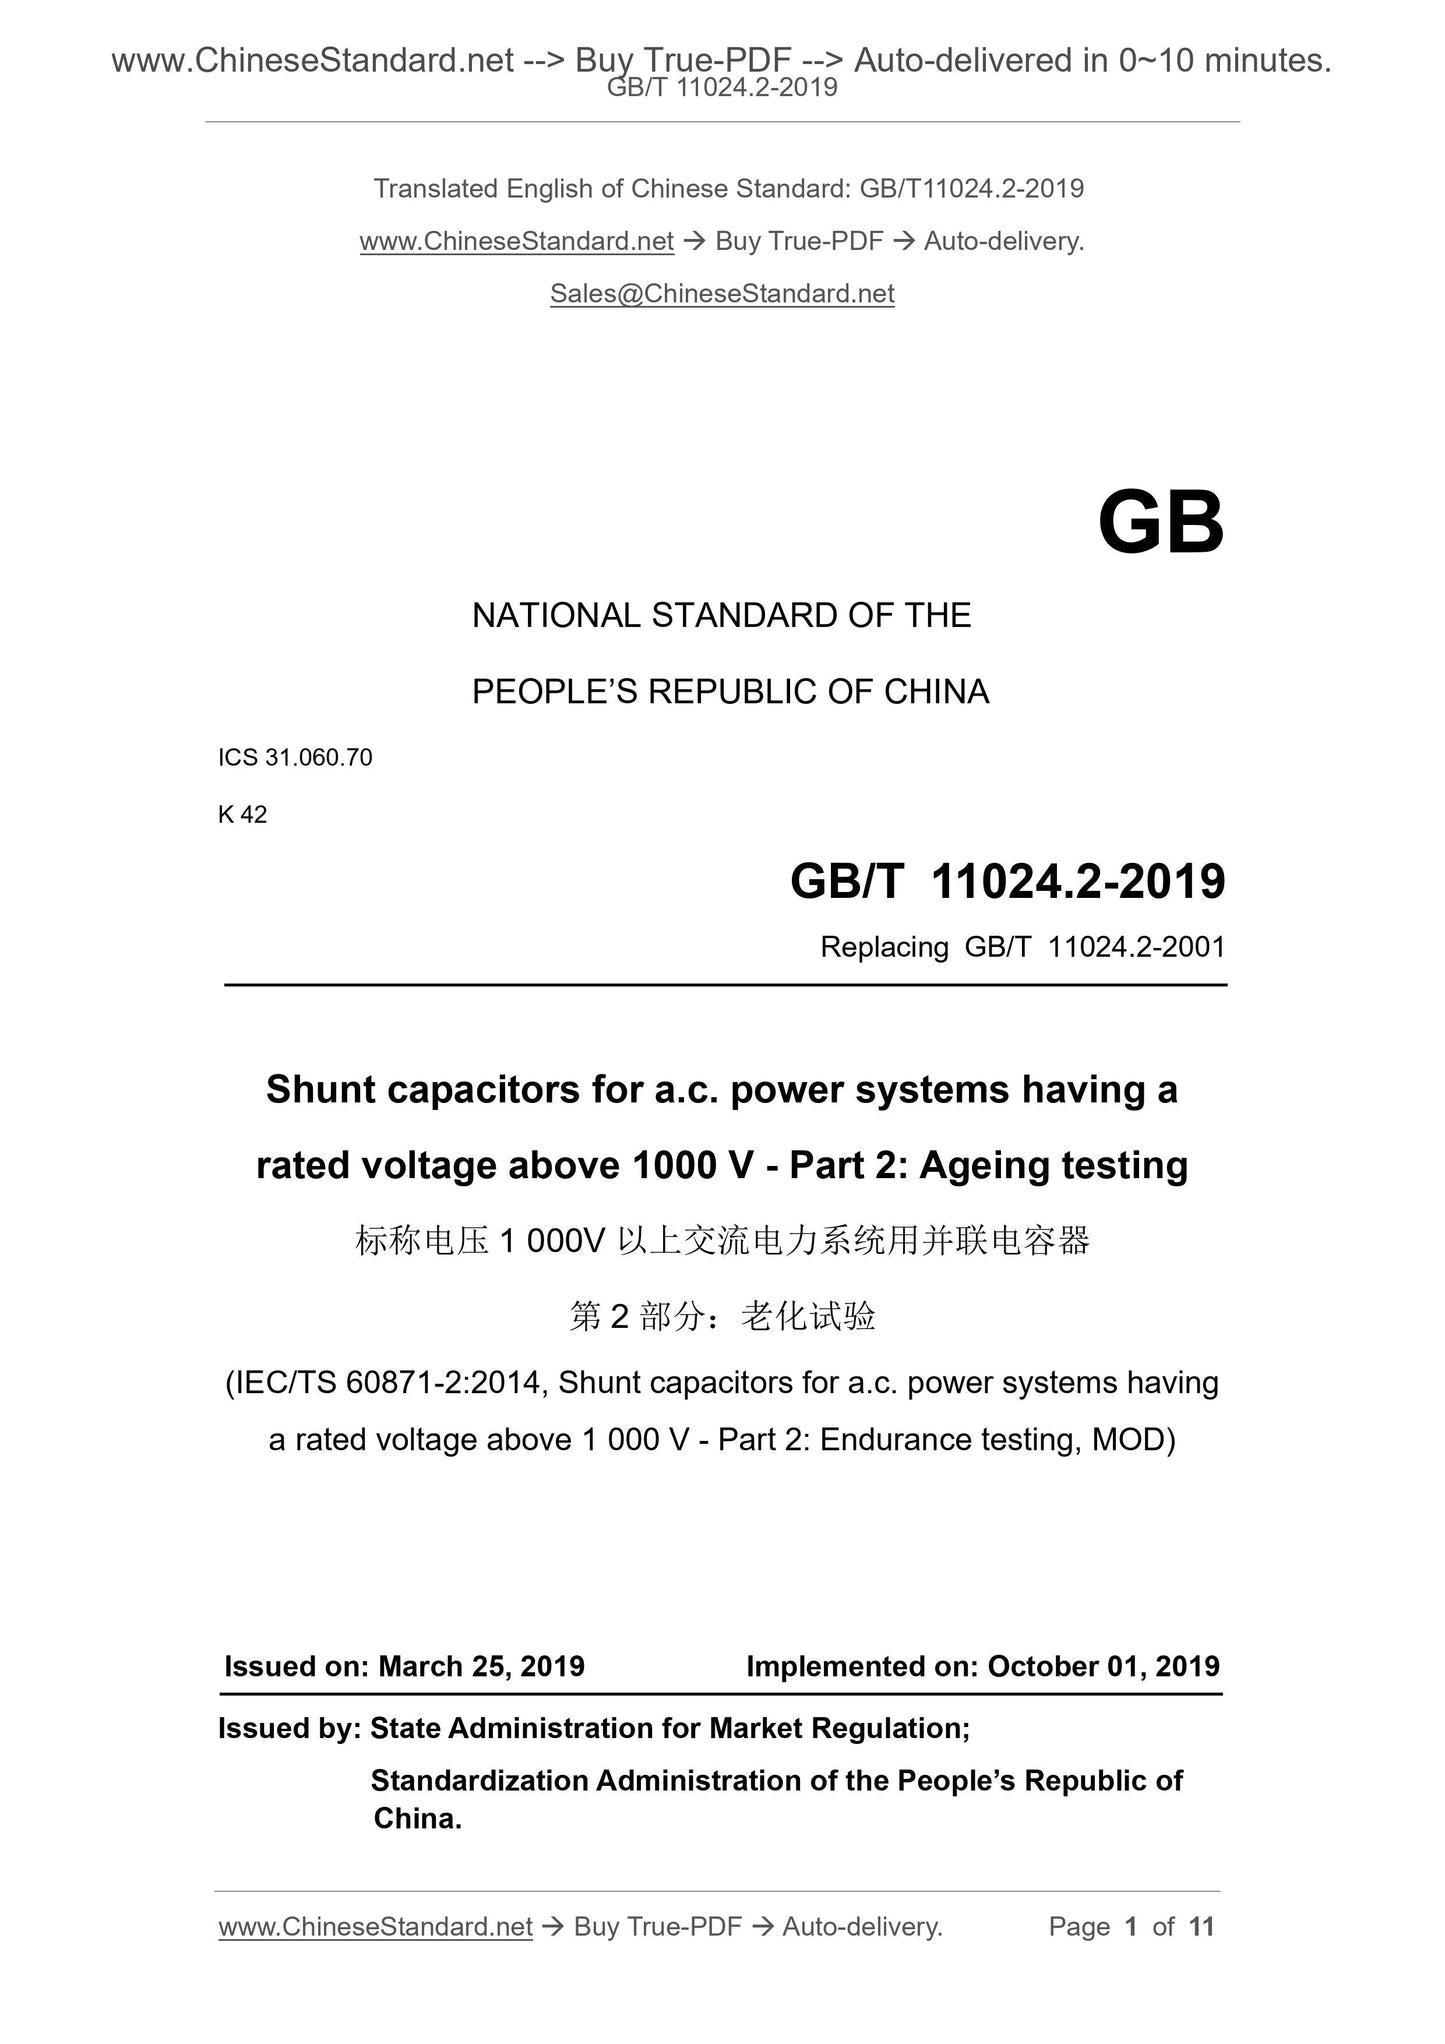 GB/T 11024.2-2019 Page 1